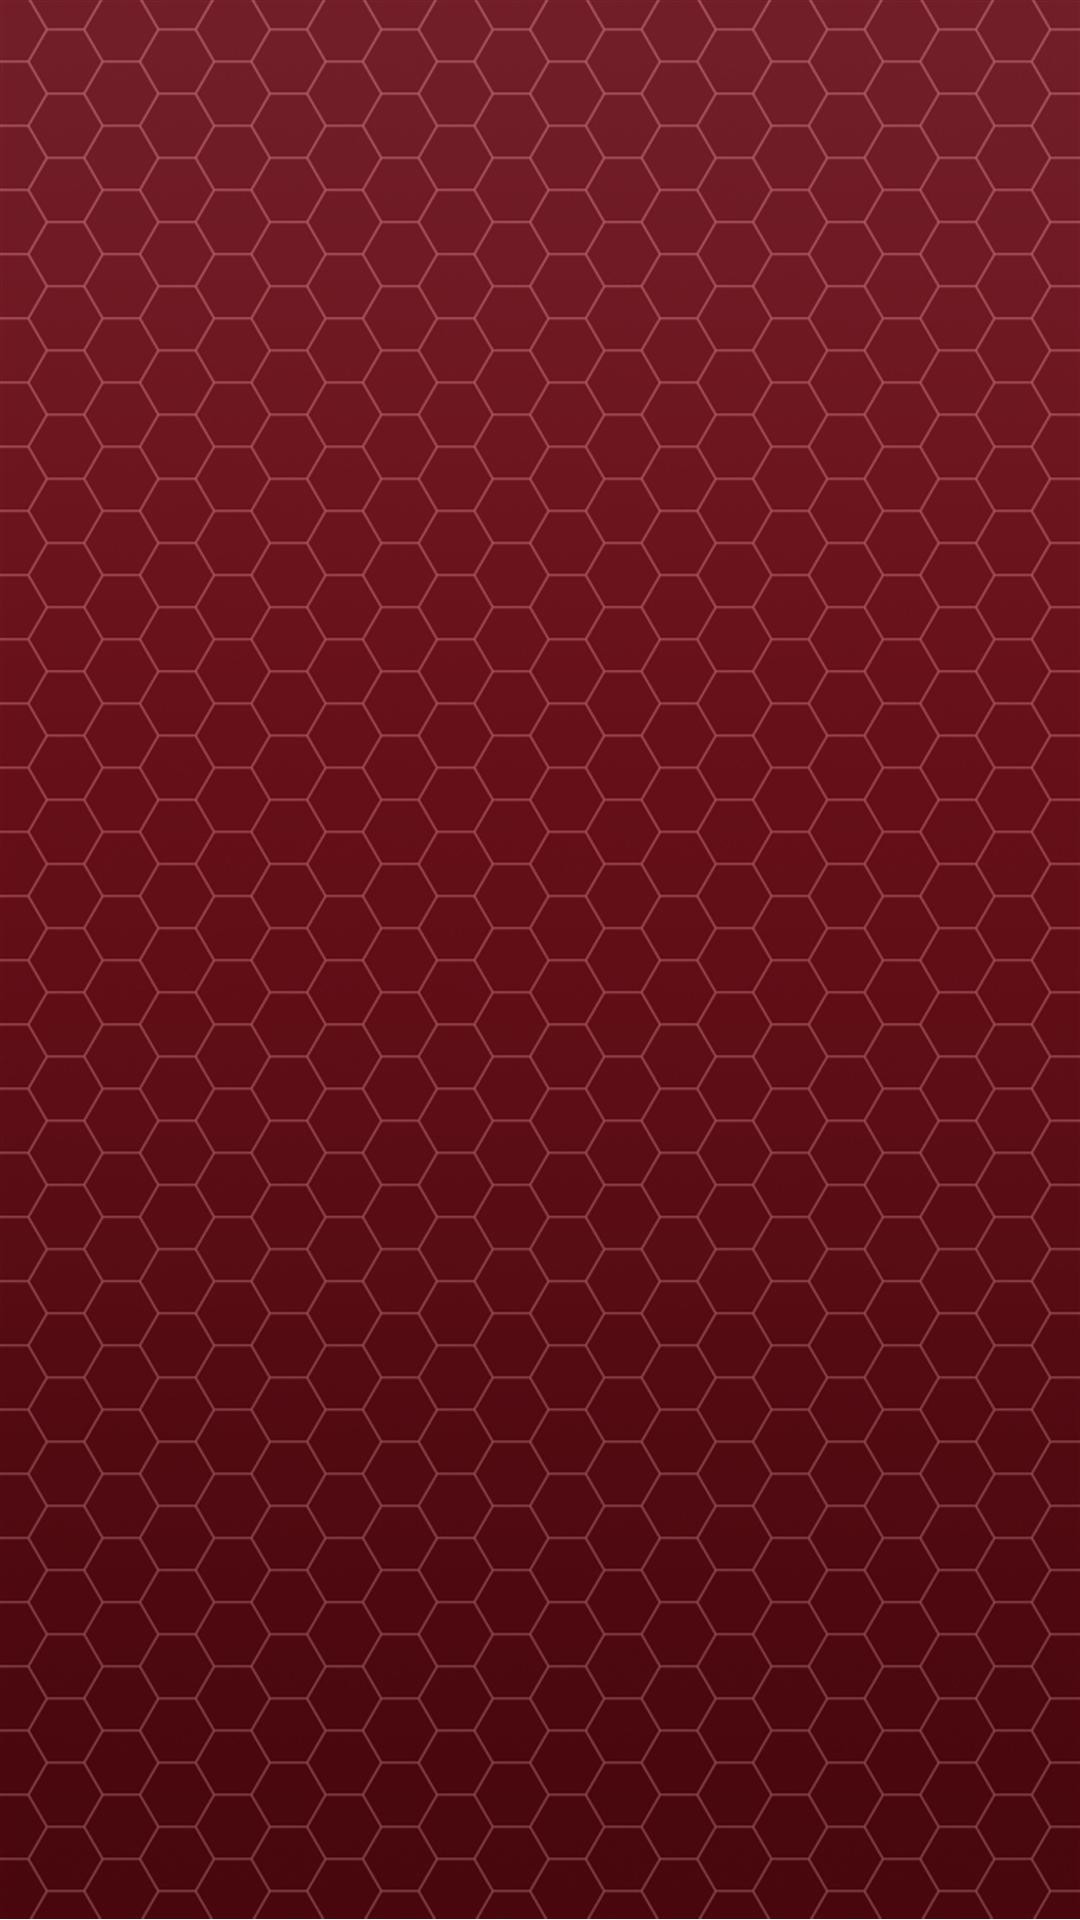 1080x1920 Honeycomb Red Pattern Android Wallpaper